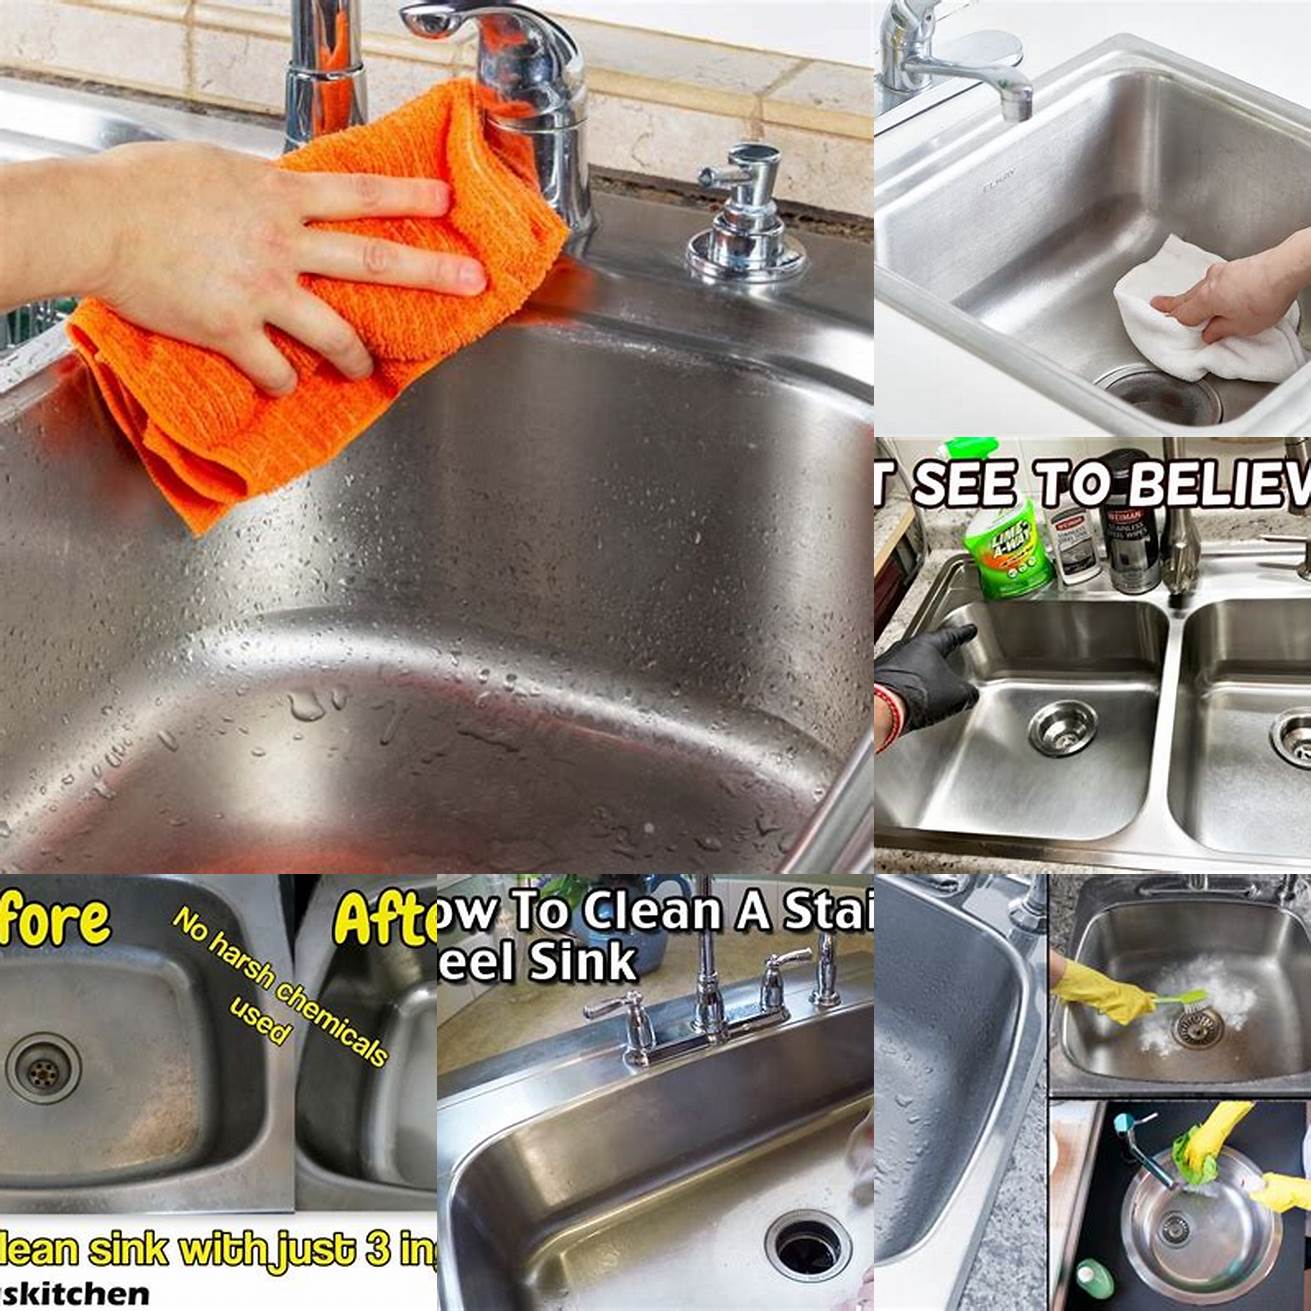 Consider using a stainless steel cleaner or polish to keep your sink shiny and free of water spots